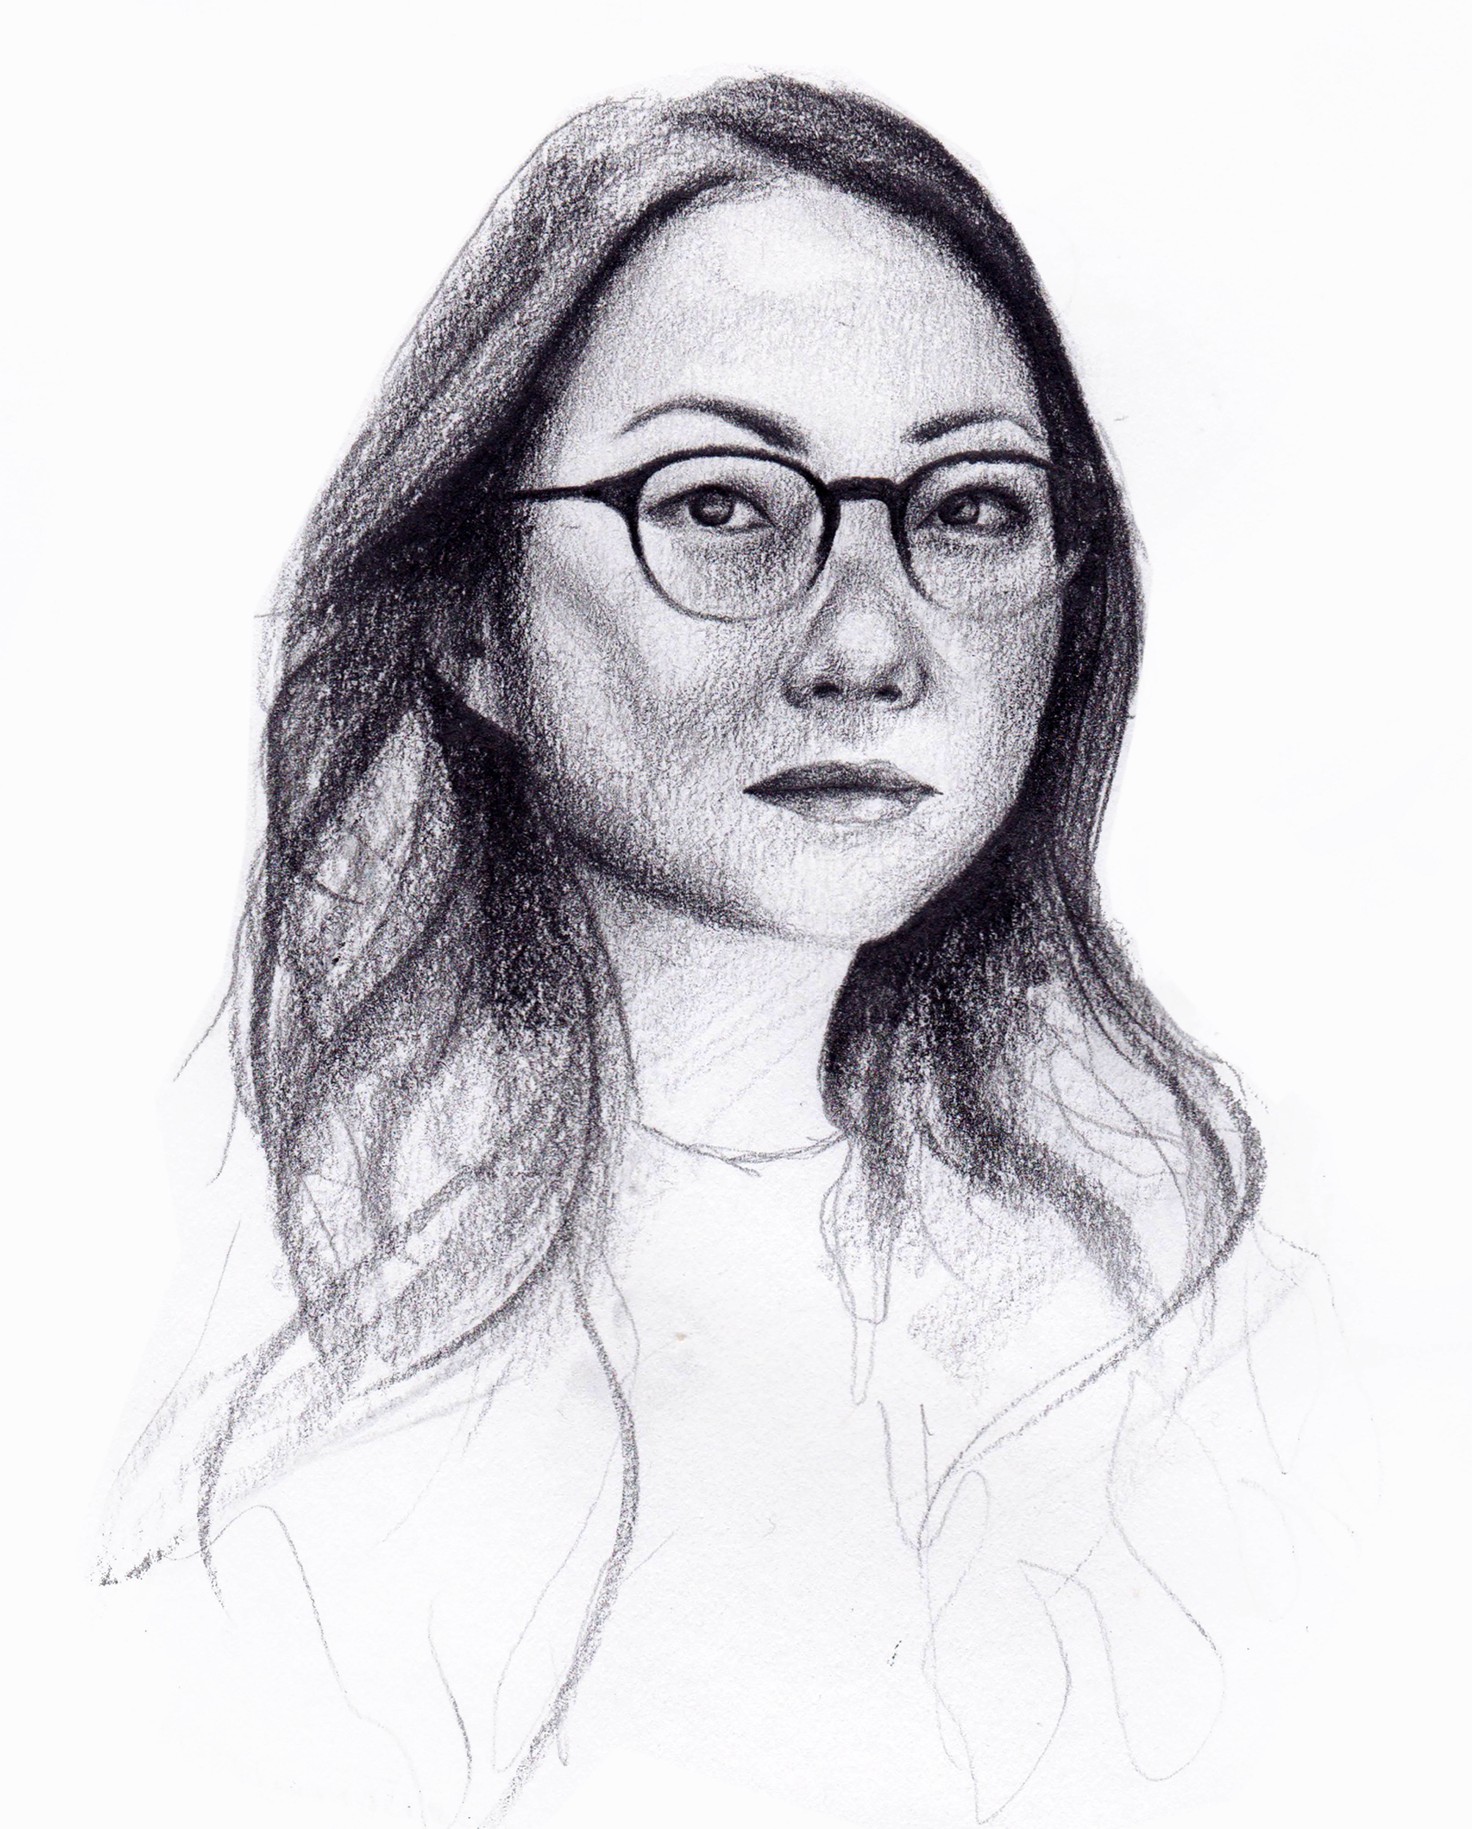 Portrait by Tatyana Fazlalizadeh. The drawing features a woman with flowing hair and rimmed glasses. She looks forward, unsmiling with lightly arched eyebrows.